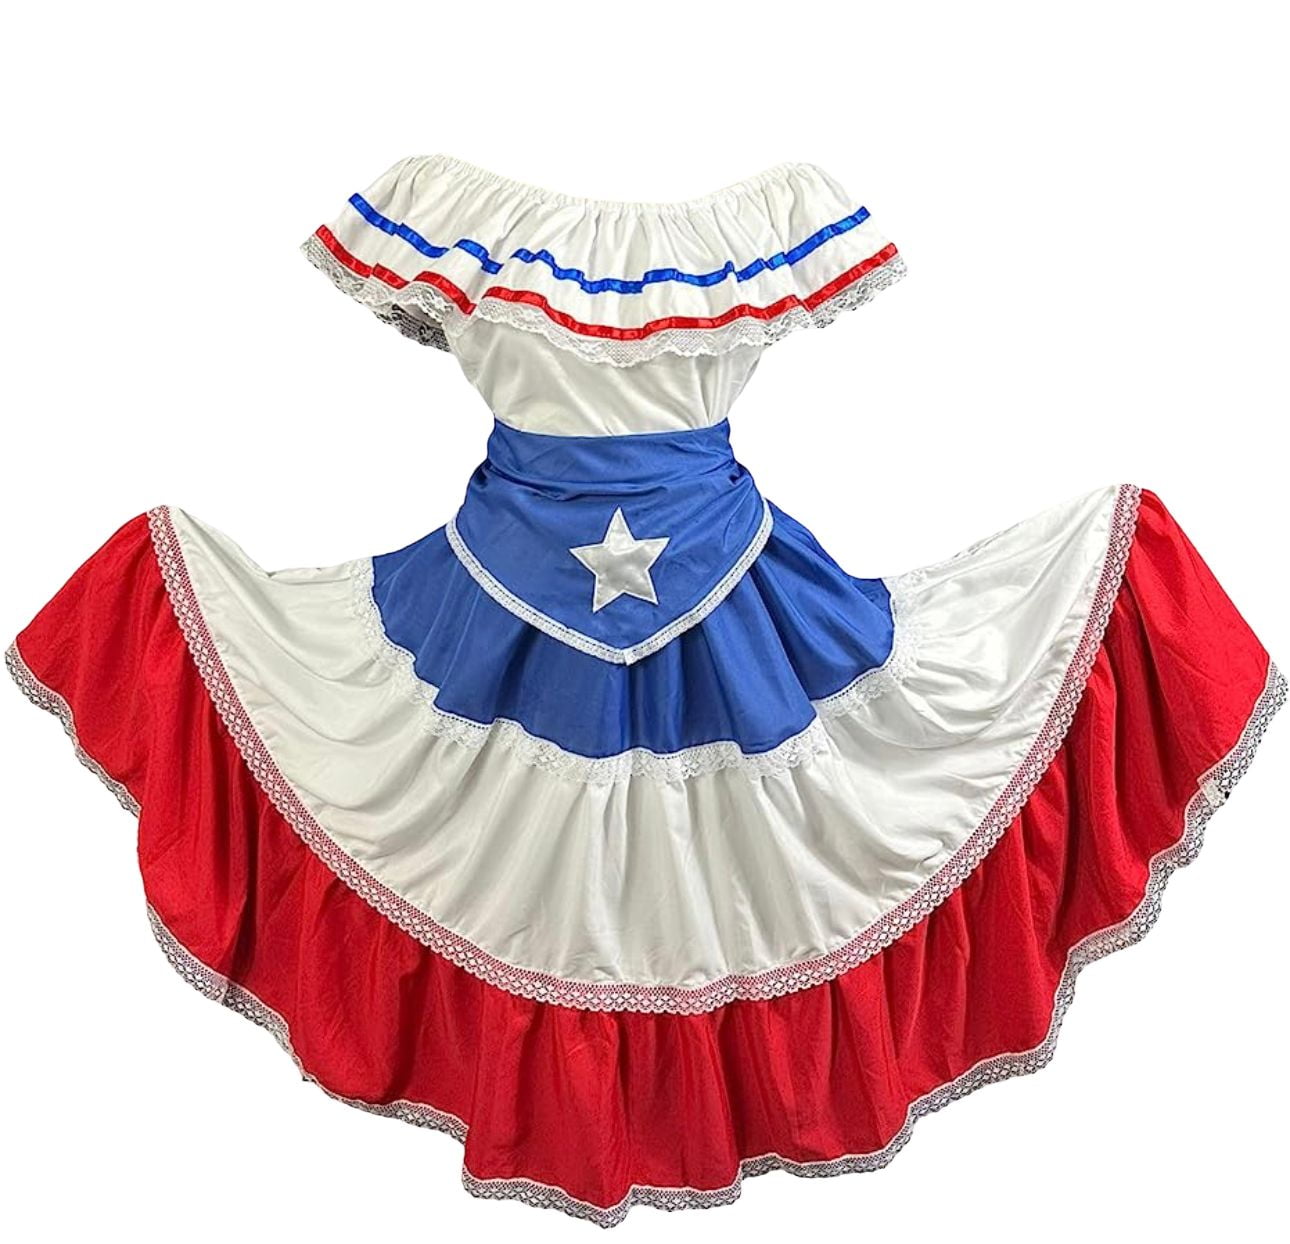 dresses from puerto rico